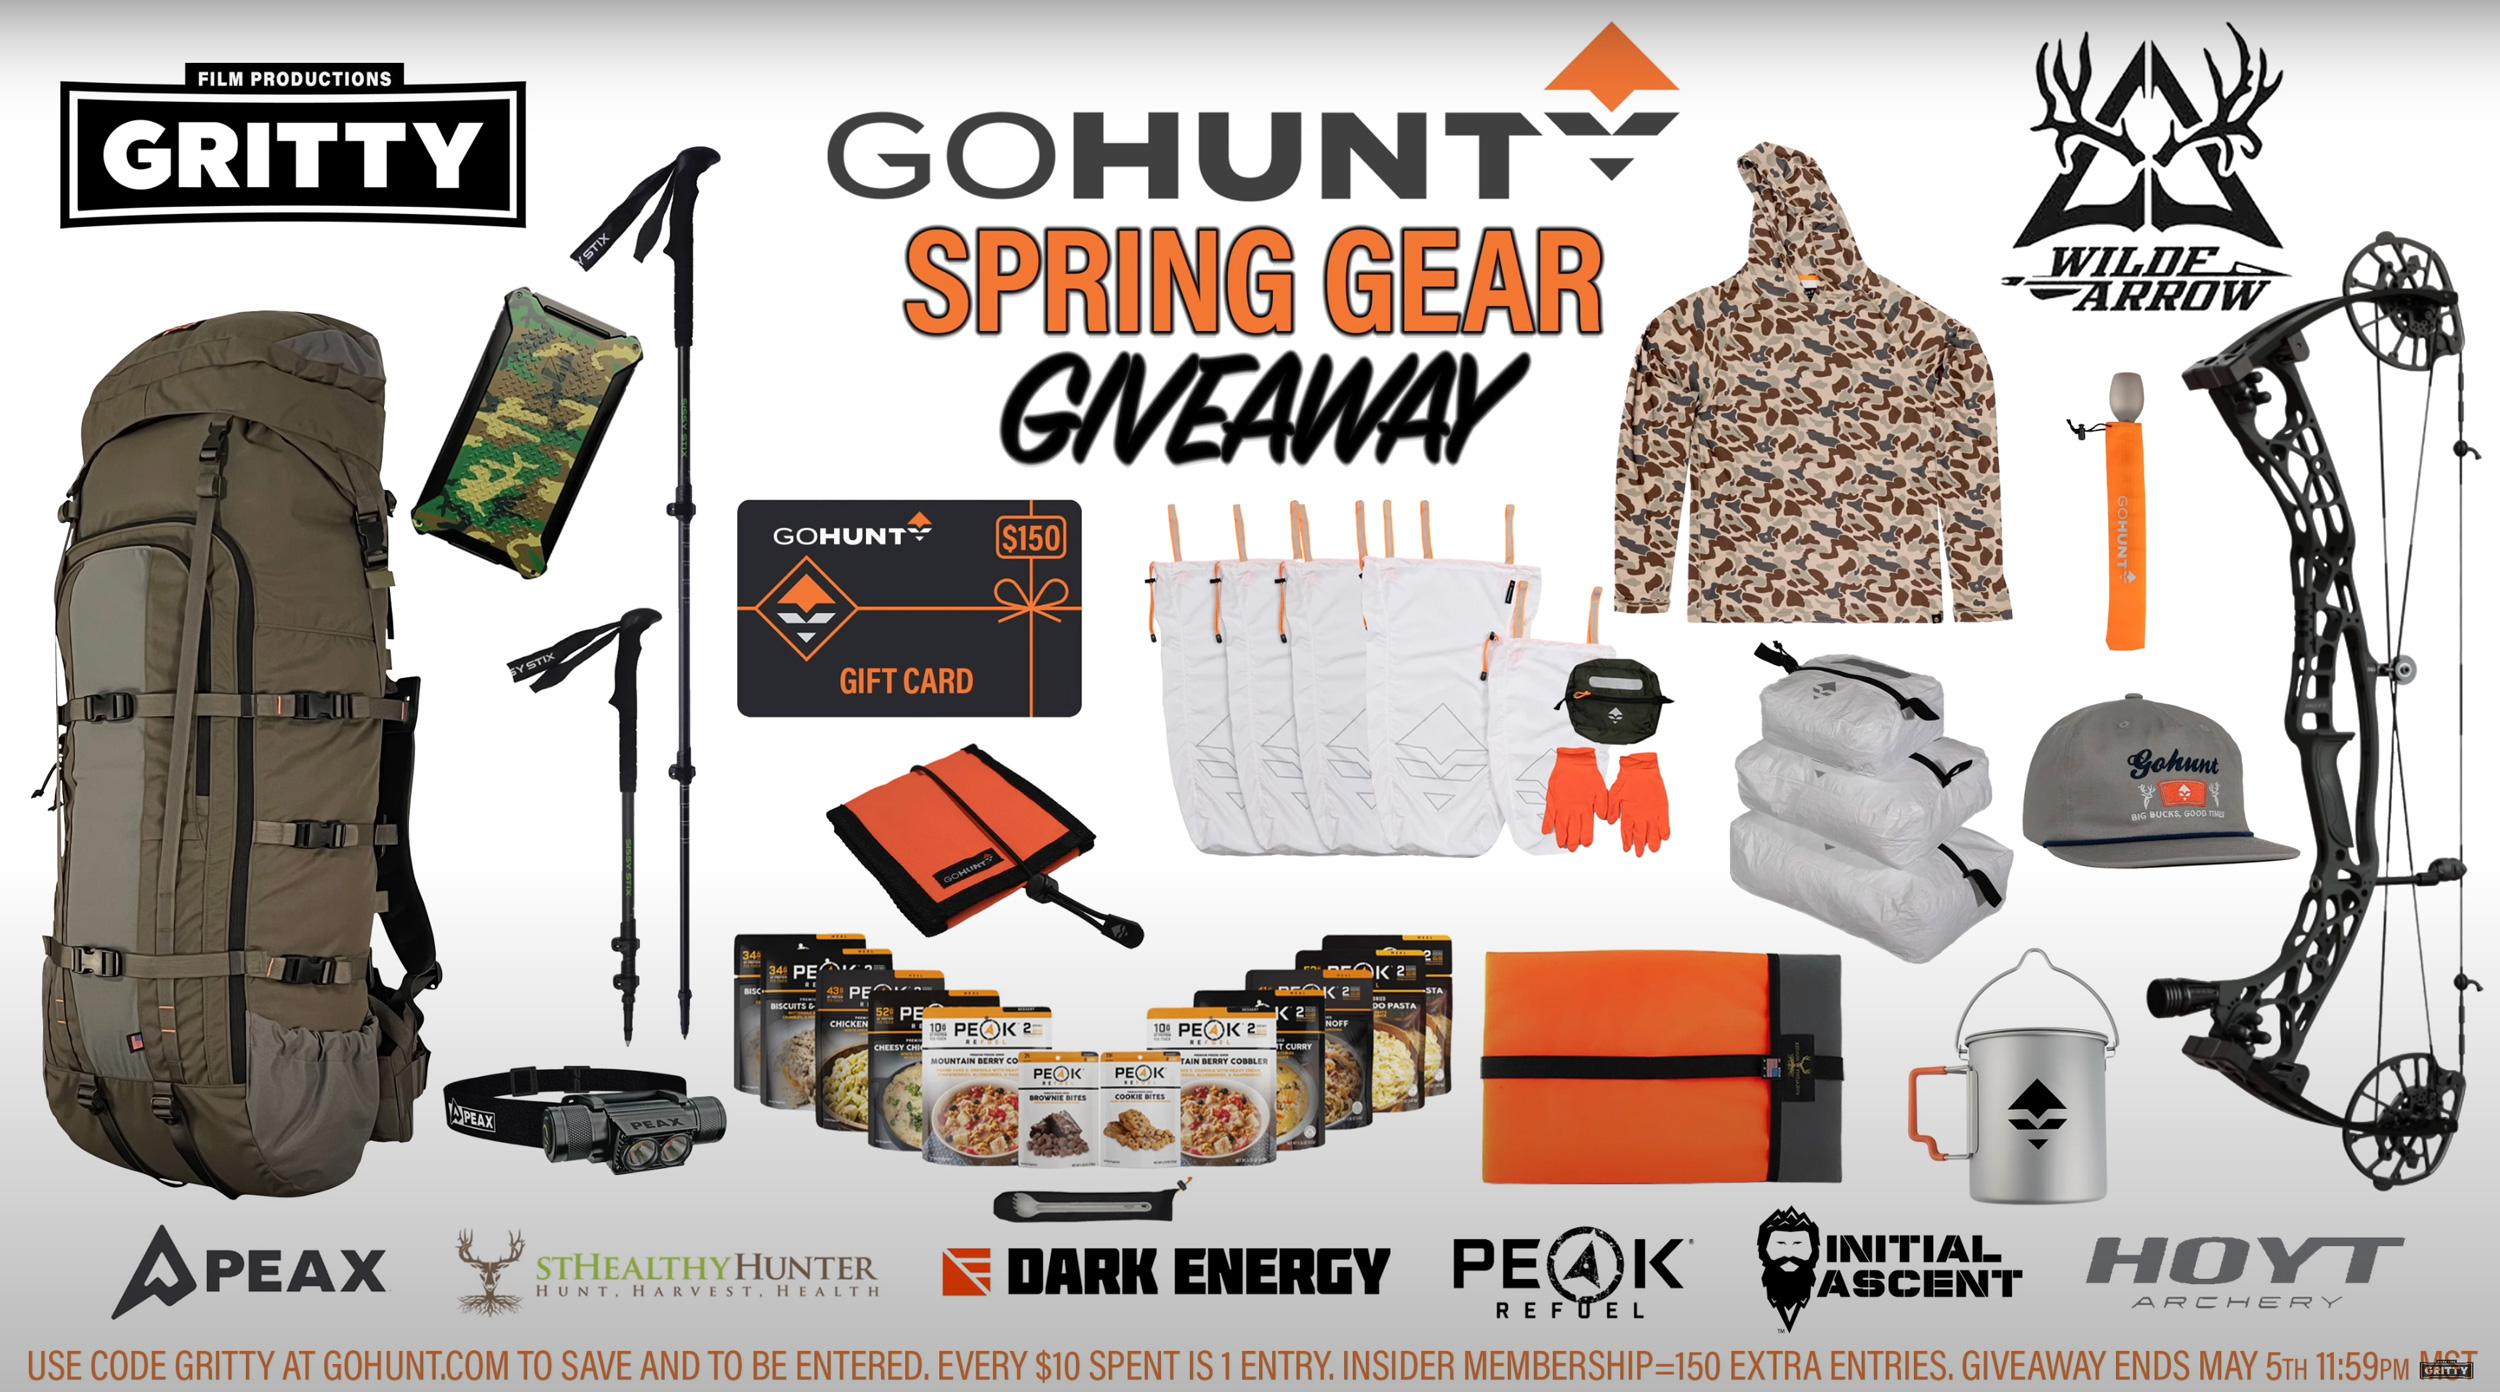 GOHUNT Spring Gear Giveaway with Gritty moose film launch